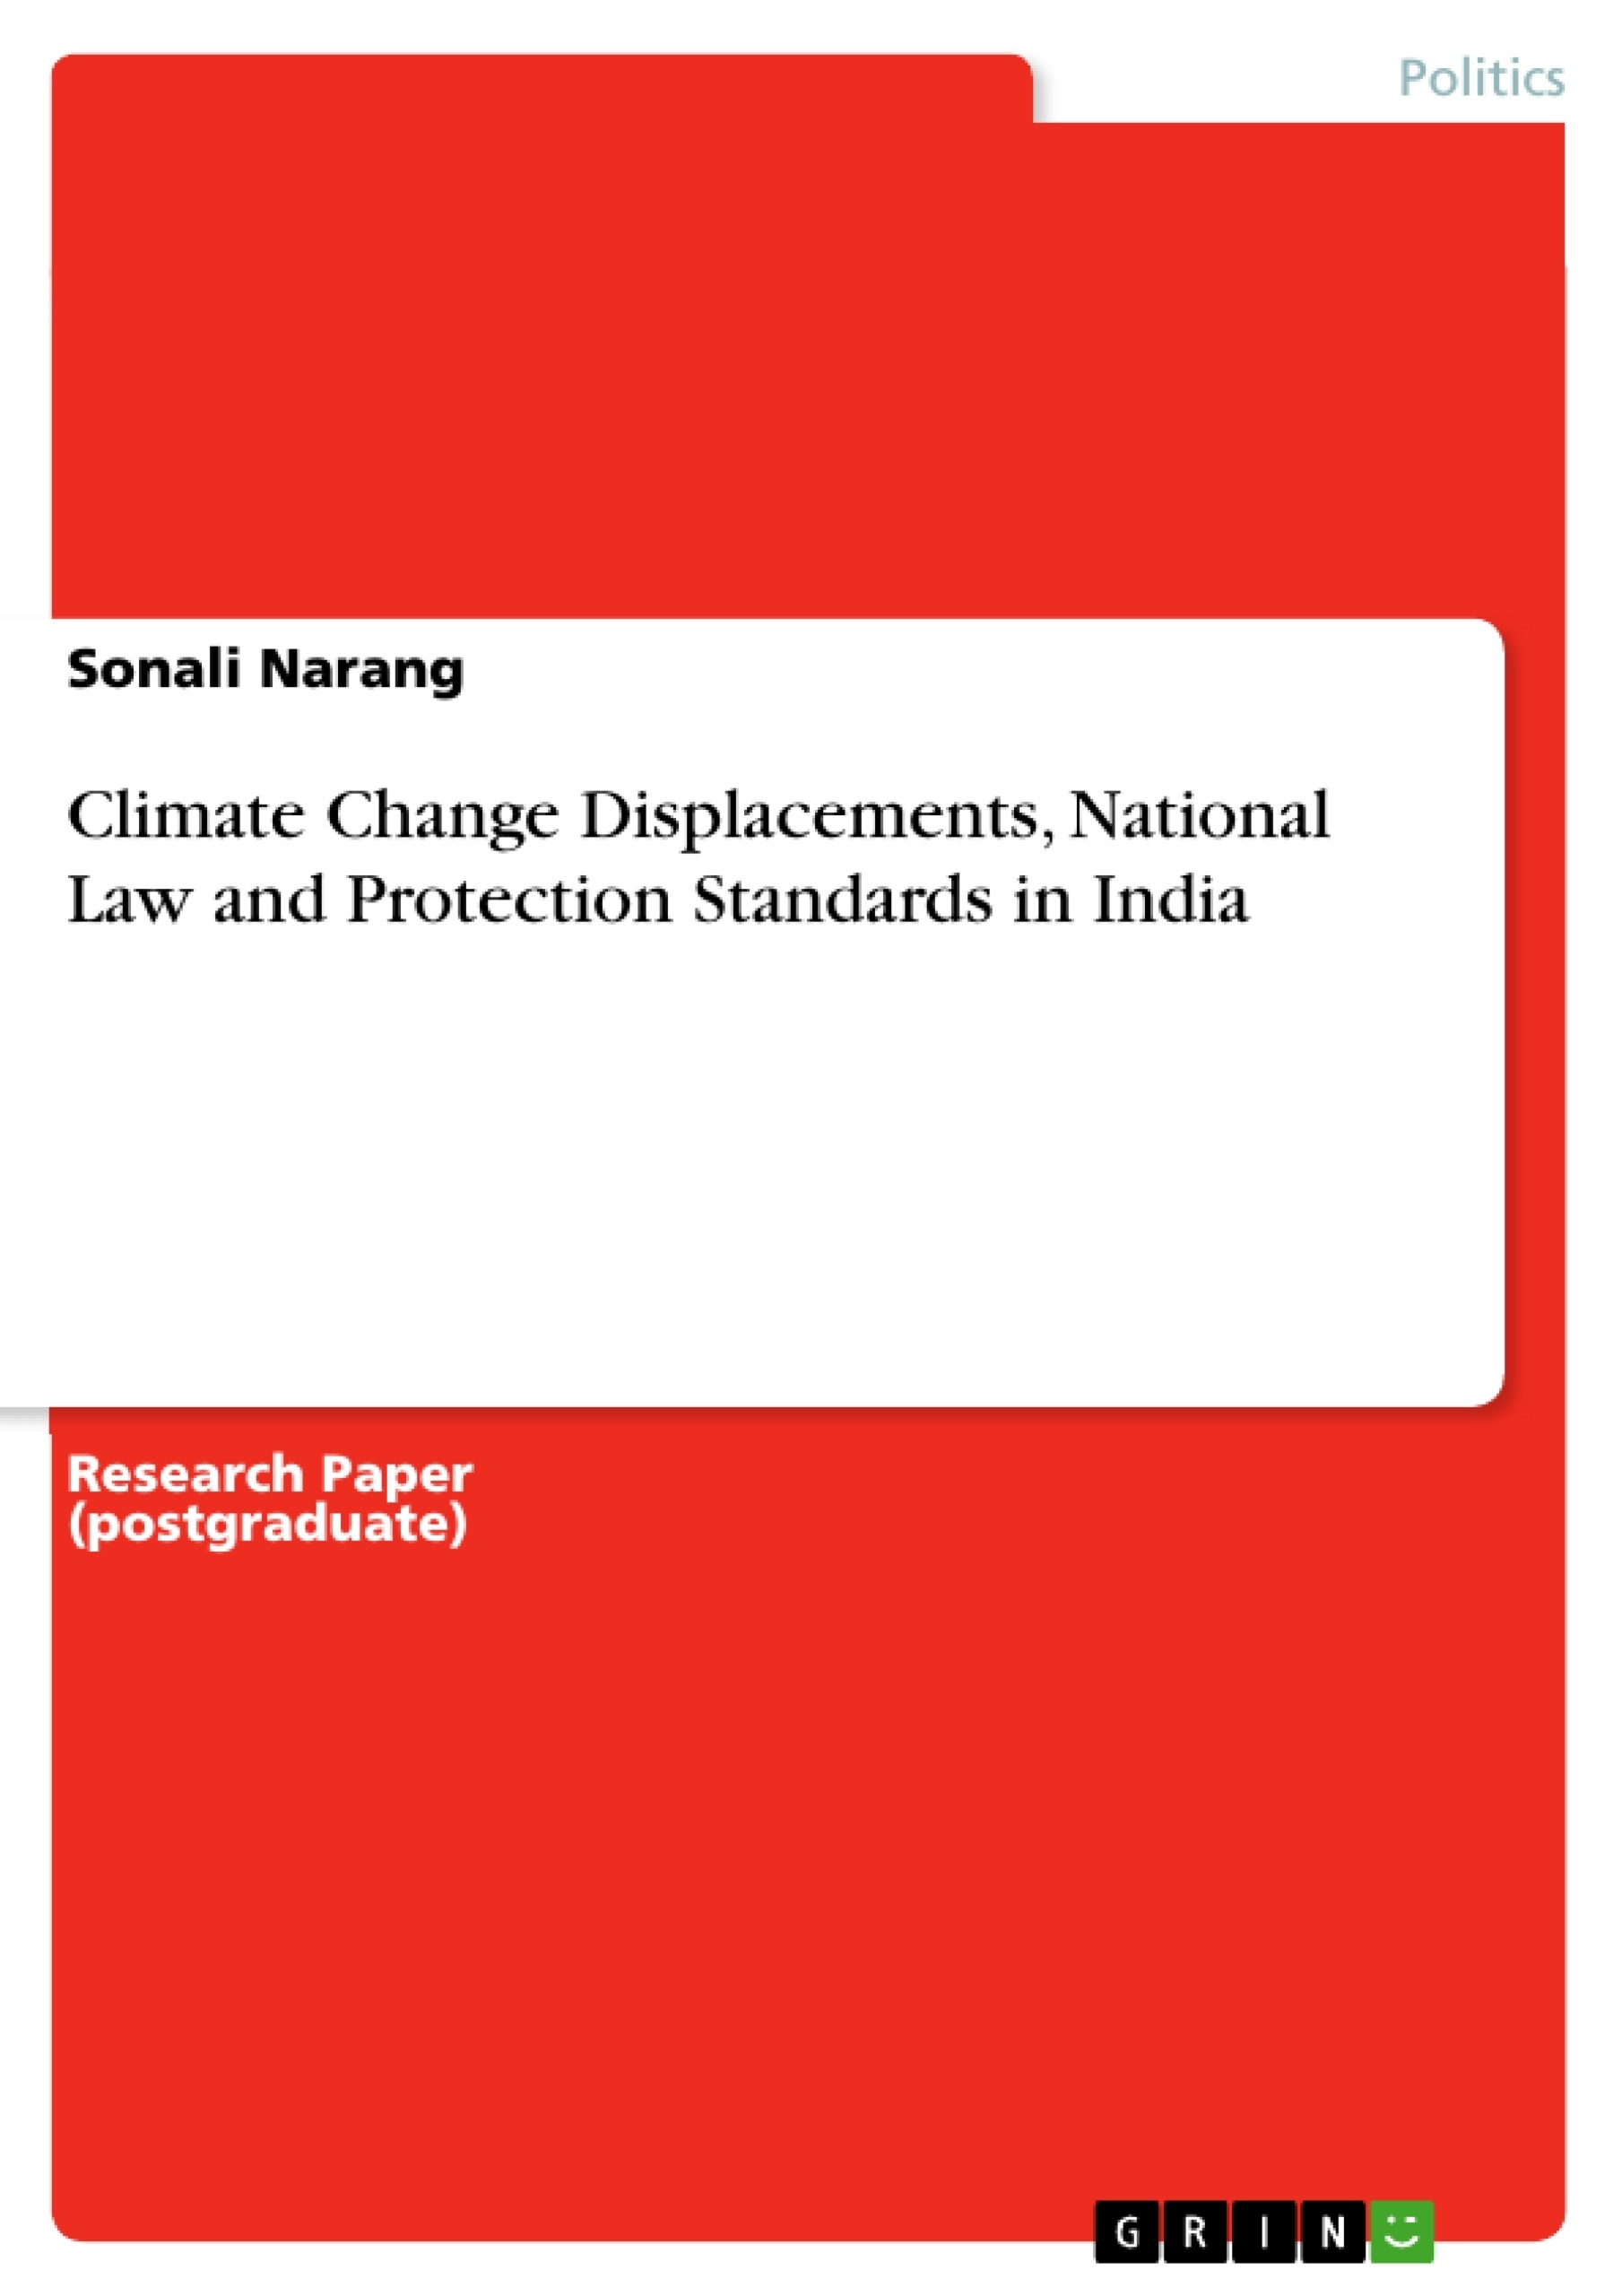 Título: Climate Change Displacements, National Law and Protection Standards in India